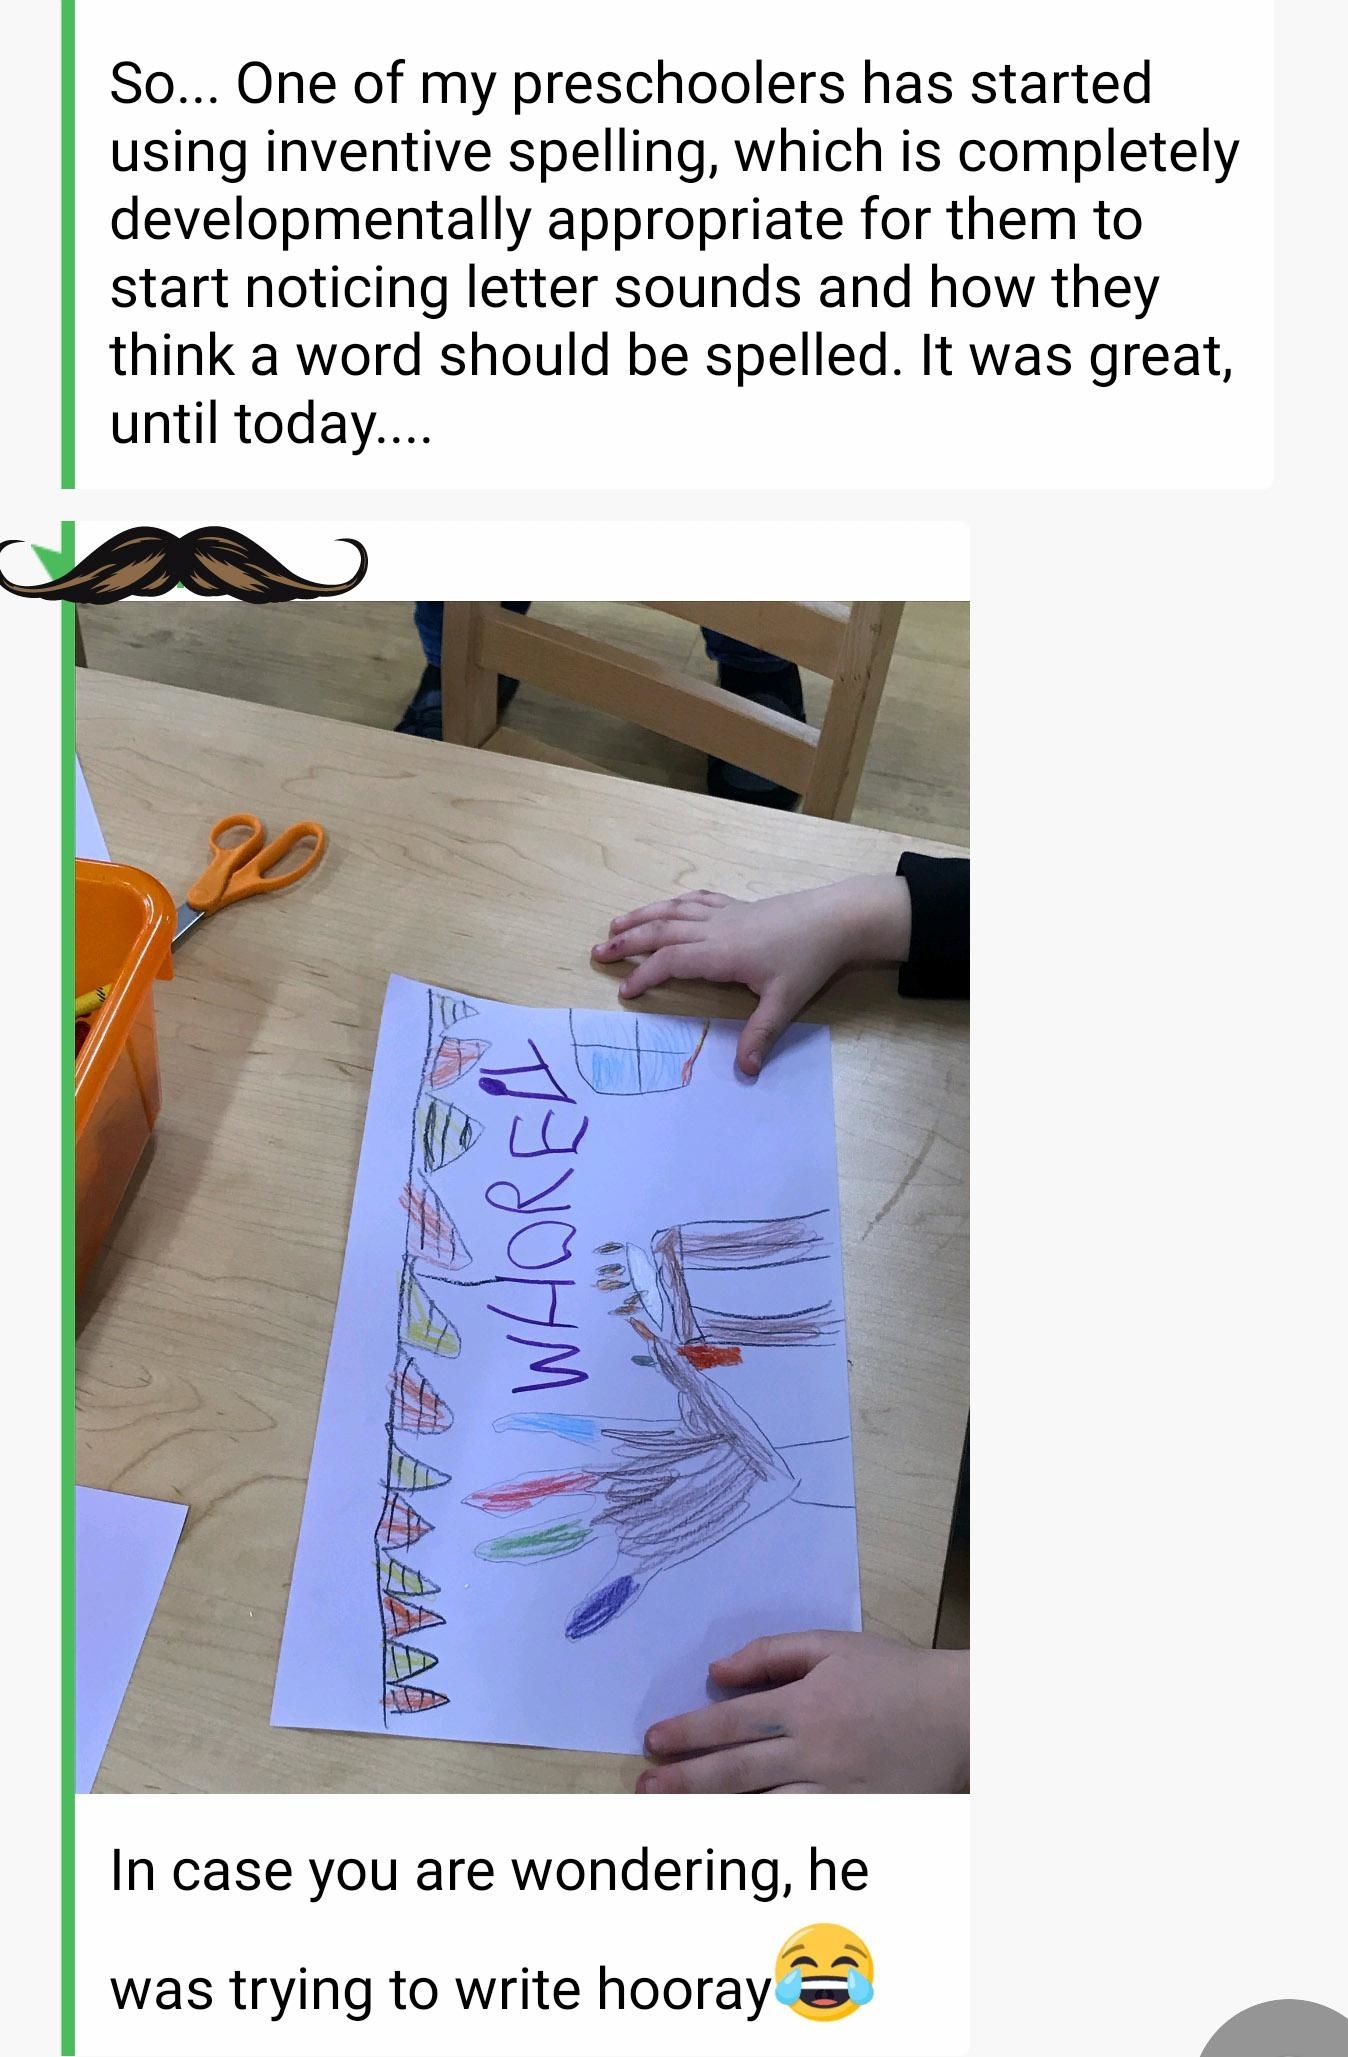 Preschool teacher says their students are starting to use inventive spelling as they start noticing letter sounds, and shows a drawing with the spelling &quot;WHOREA,&quot; which teacher explains is supposed to be &quot;hooray&quot;